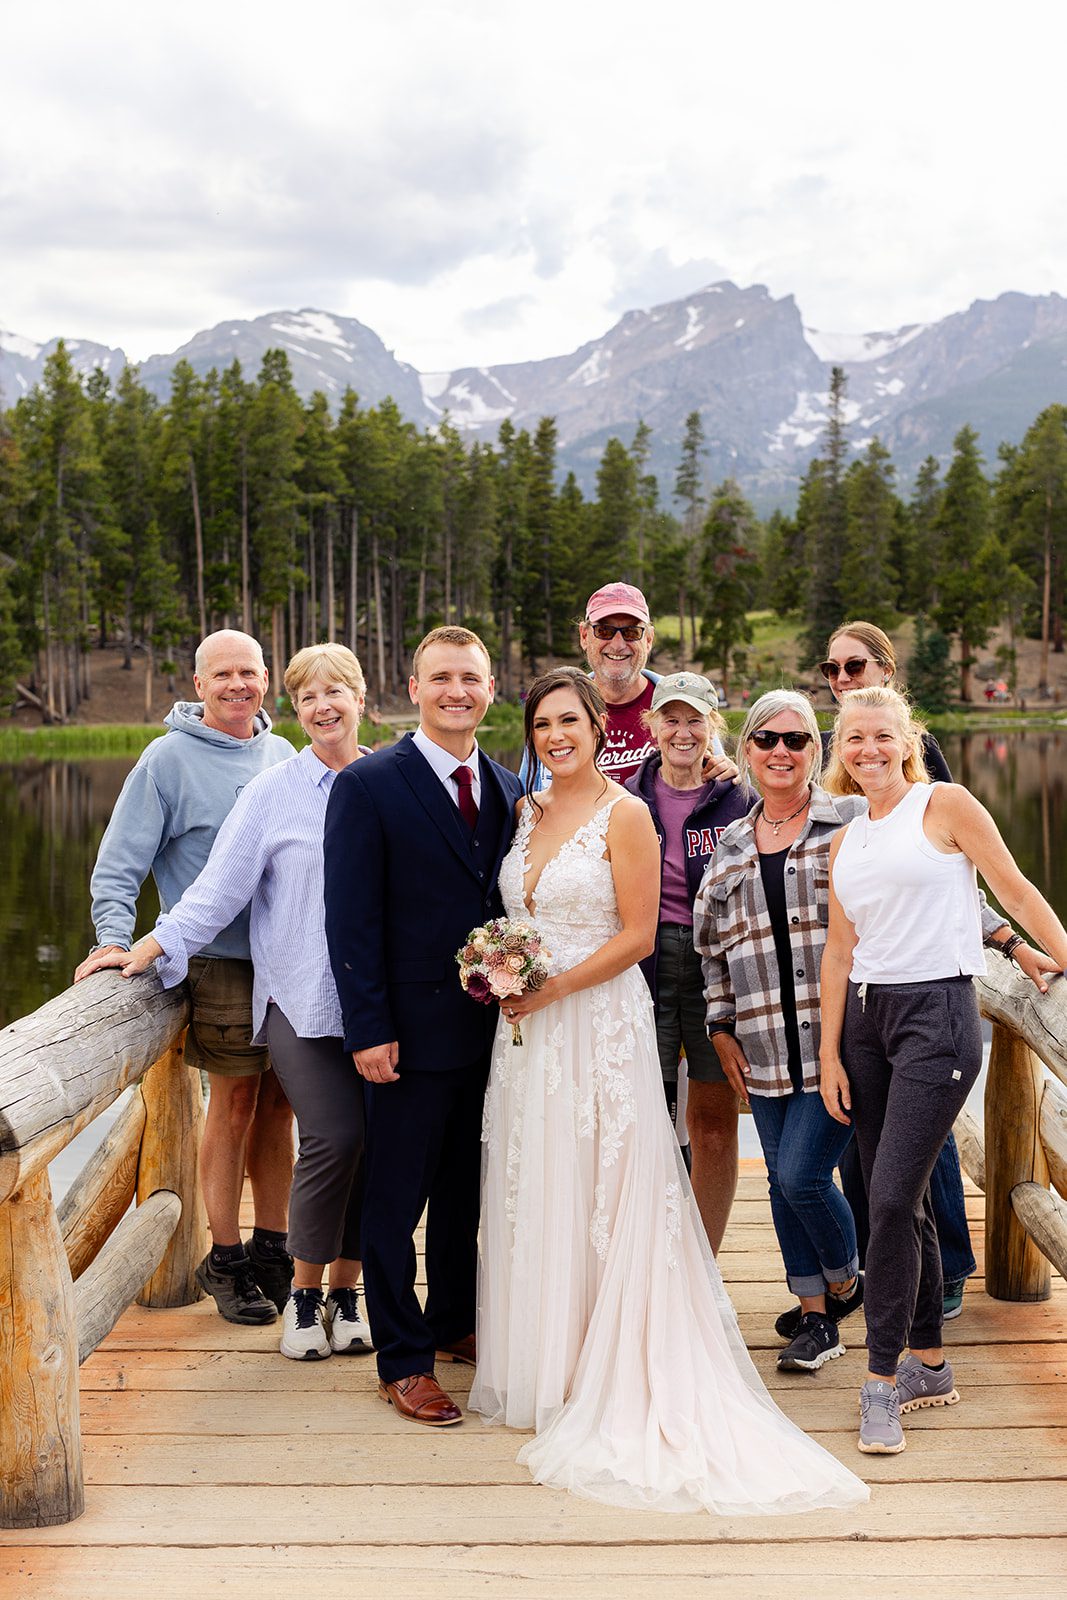 Couple with strangers who became friends after Sprague Lake elopement ceremony